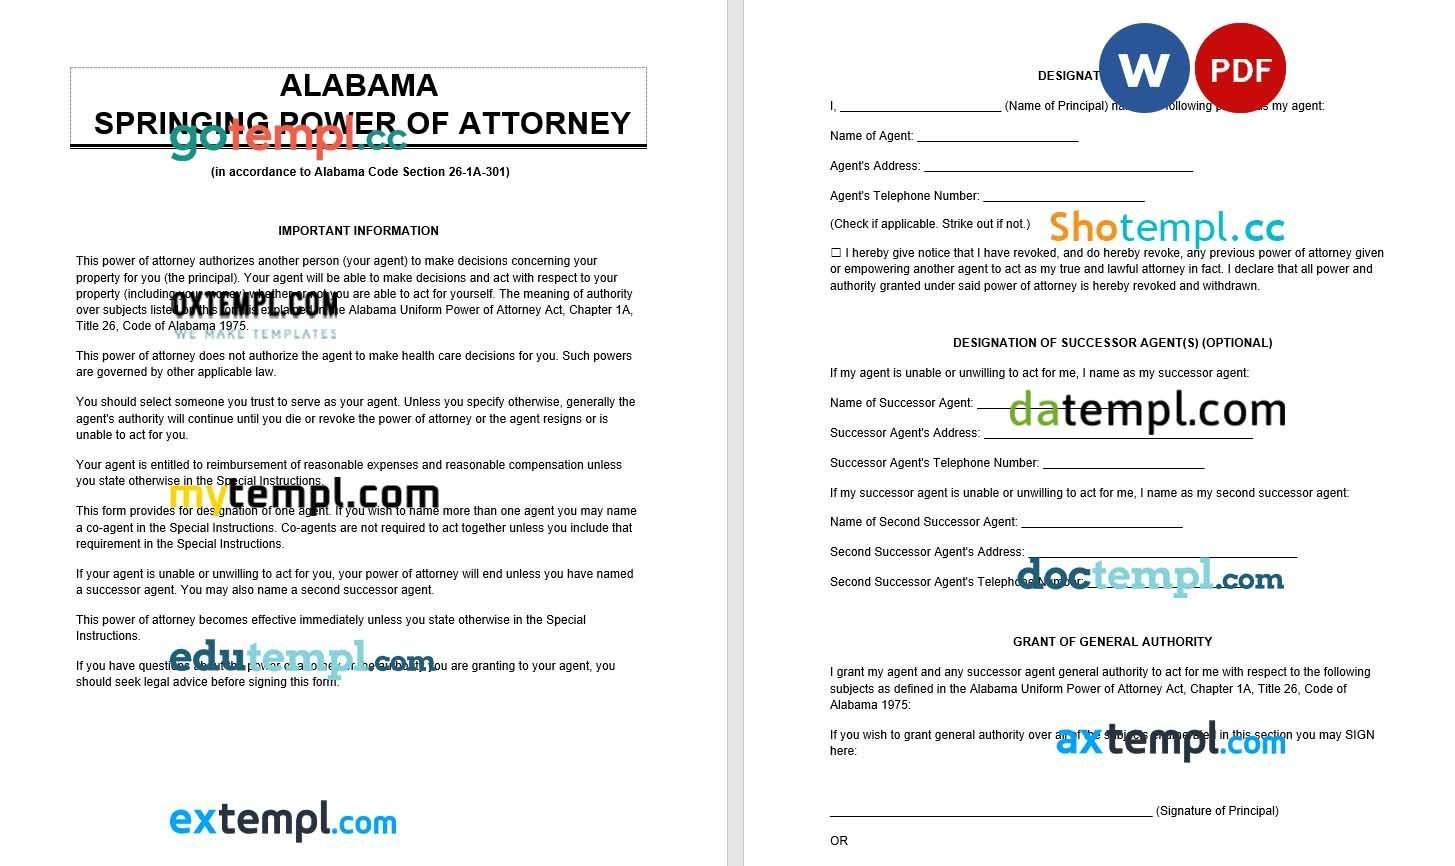 Alabama Springing Power of Attorney example, fully editable